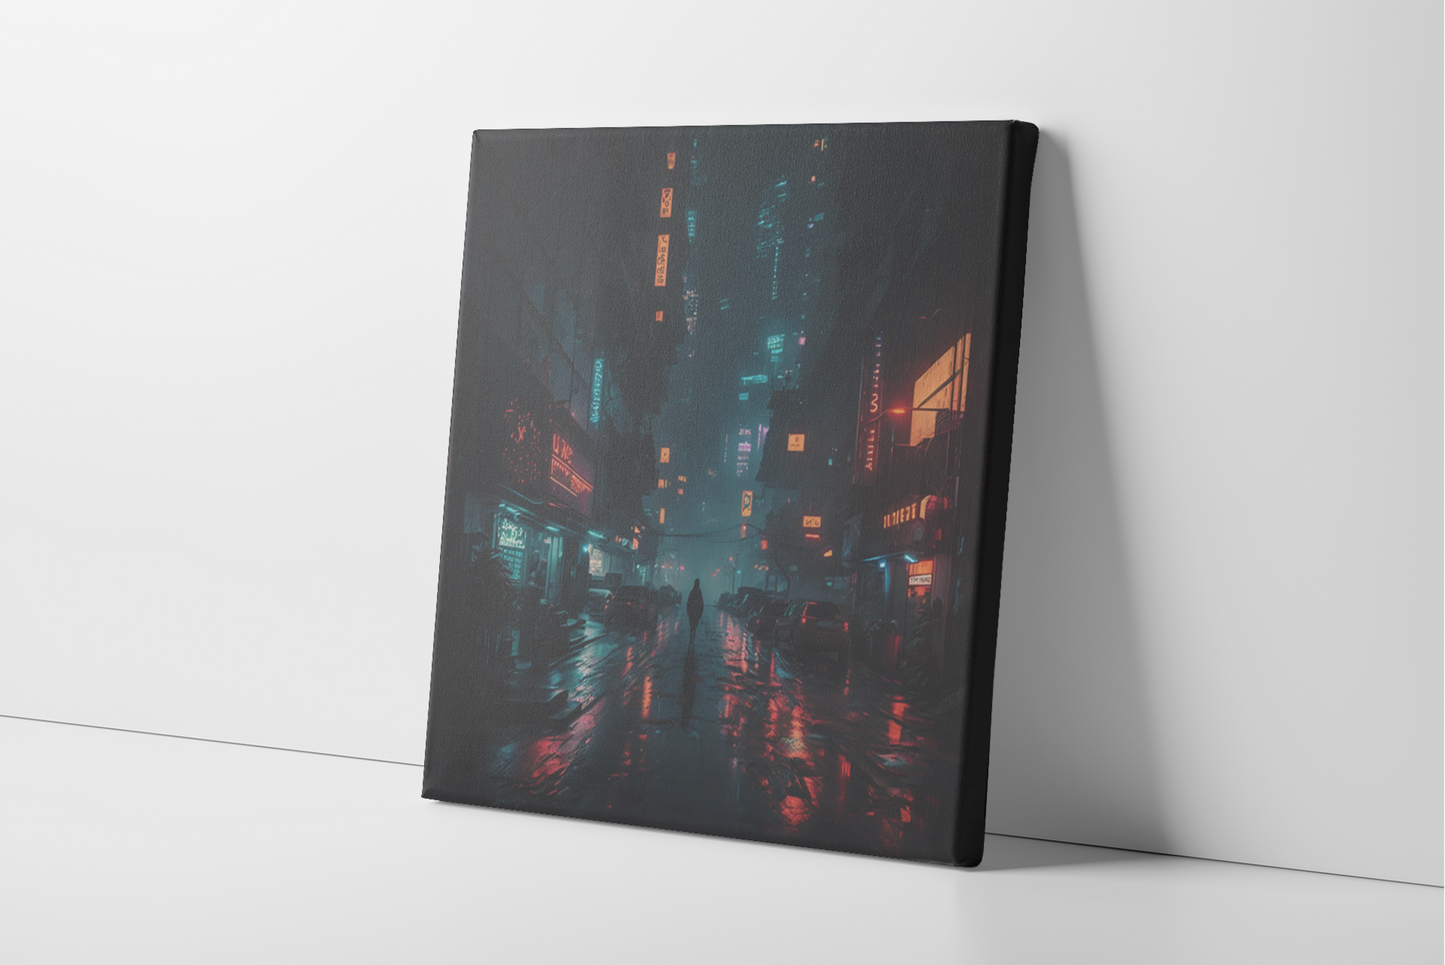 Cyberpunk City Street at Night Canvas Wall Art, Lone Person on Cyberpunk City Street, Cyberpunk Commercial District with Neon Vendor Signs